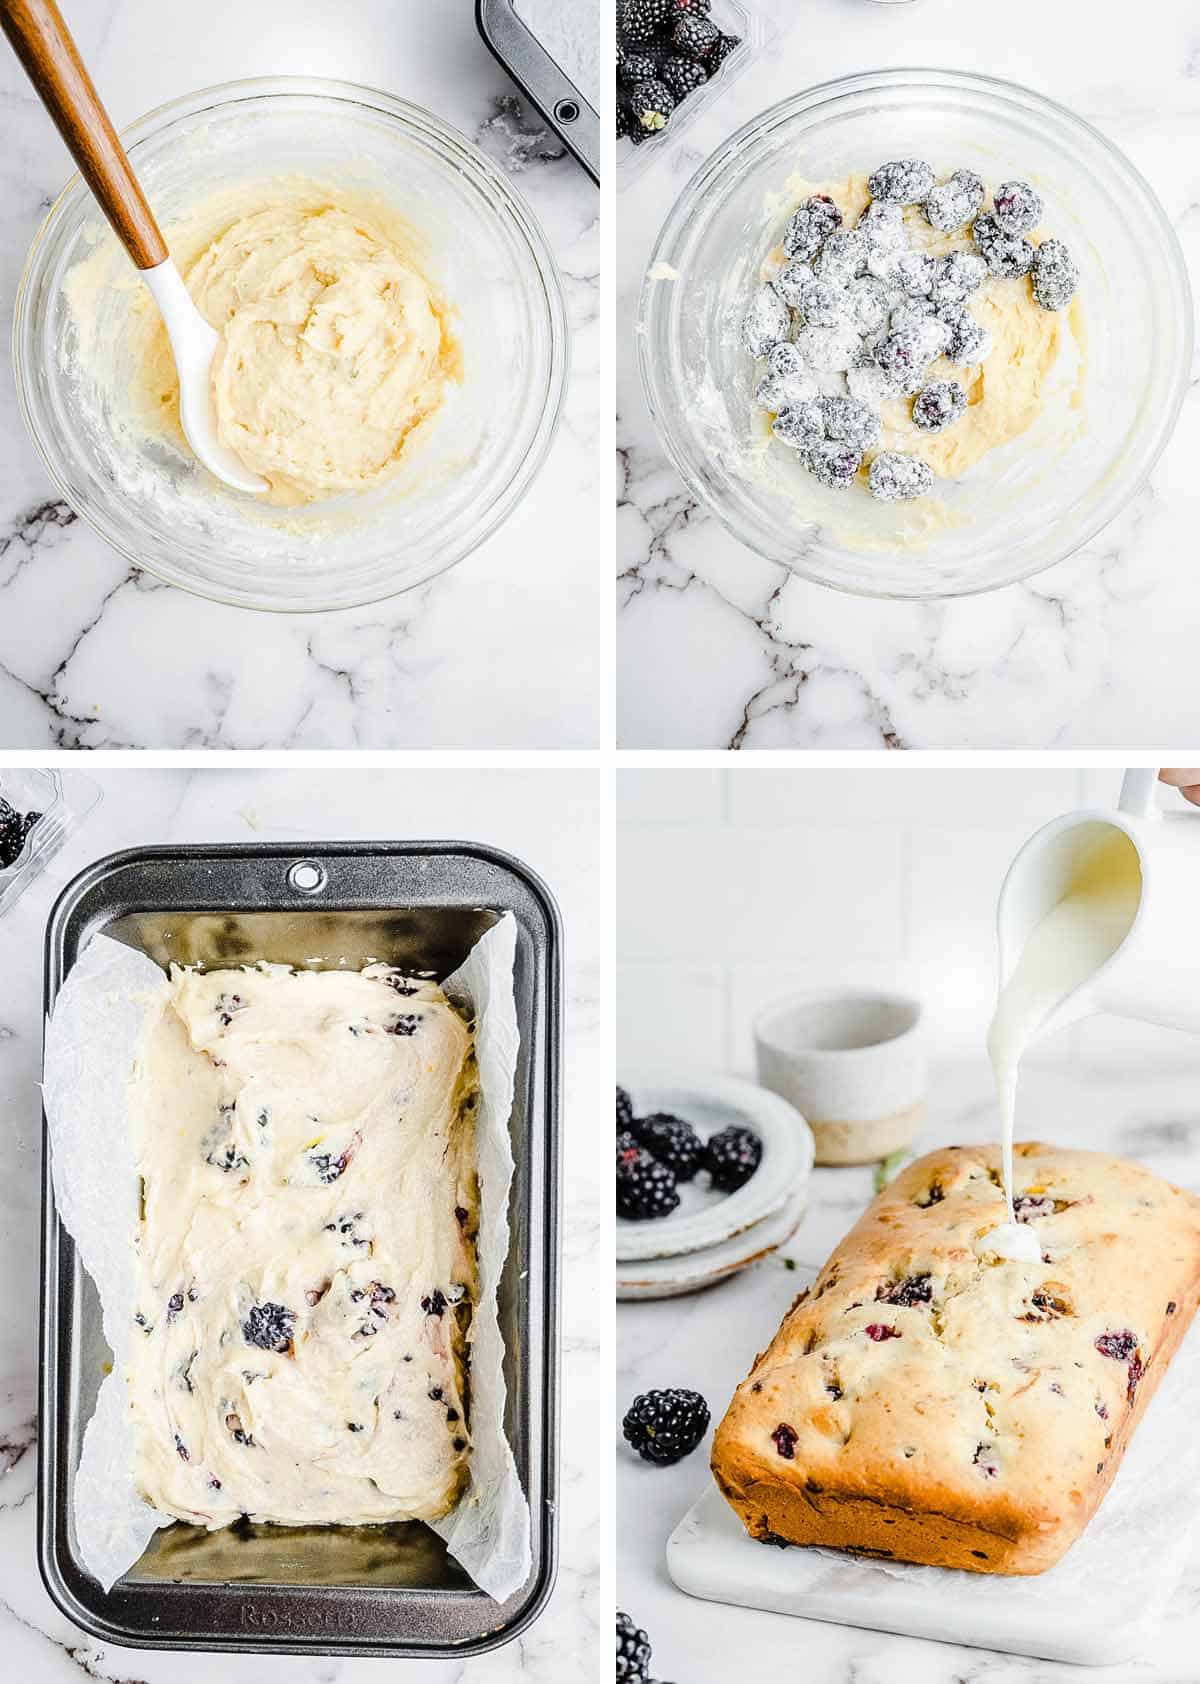 a collage shows how to make lemon blackberry bread from scratch.